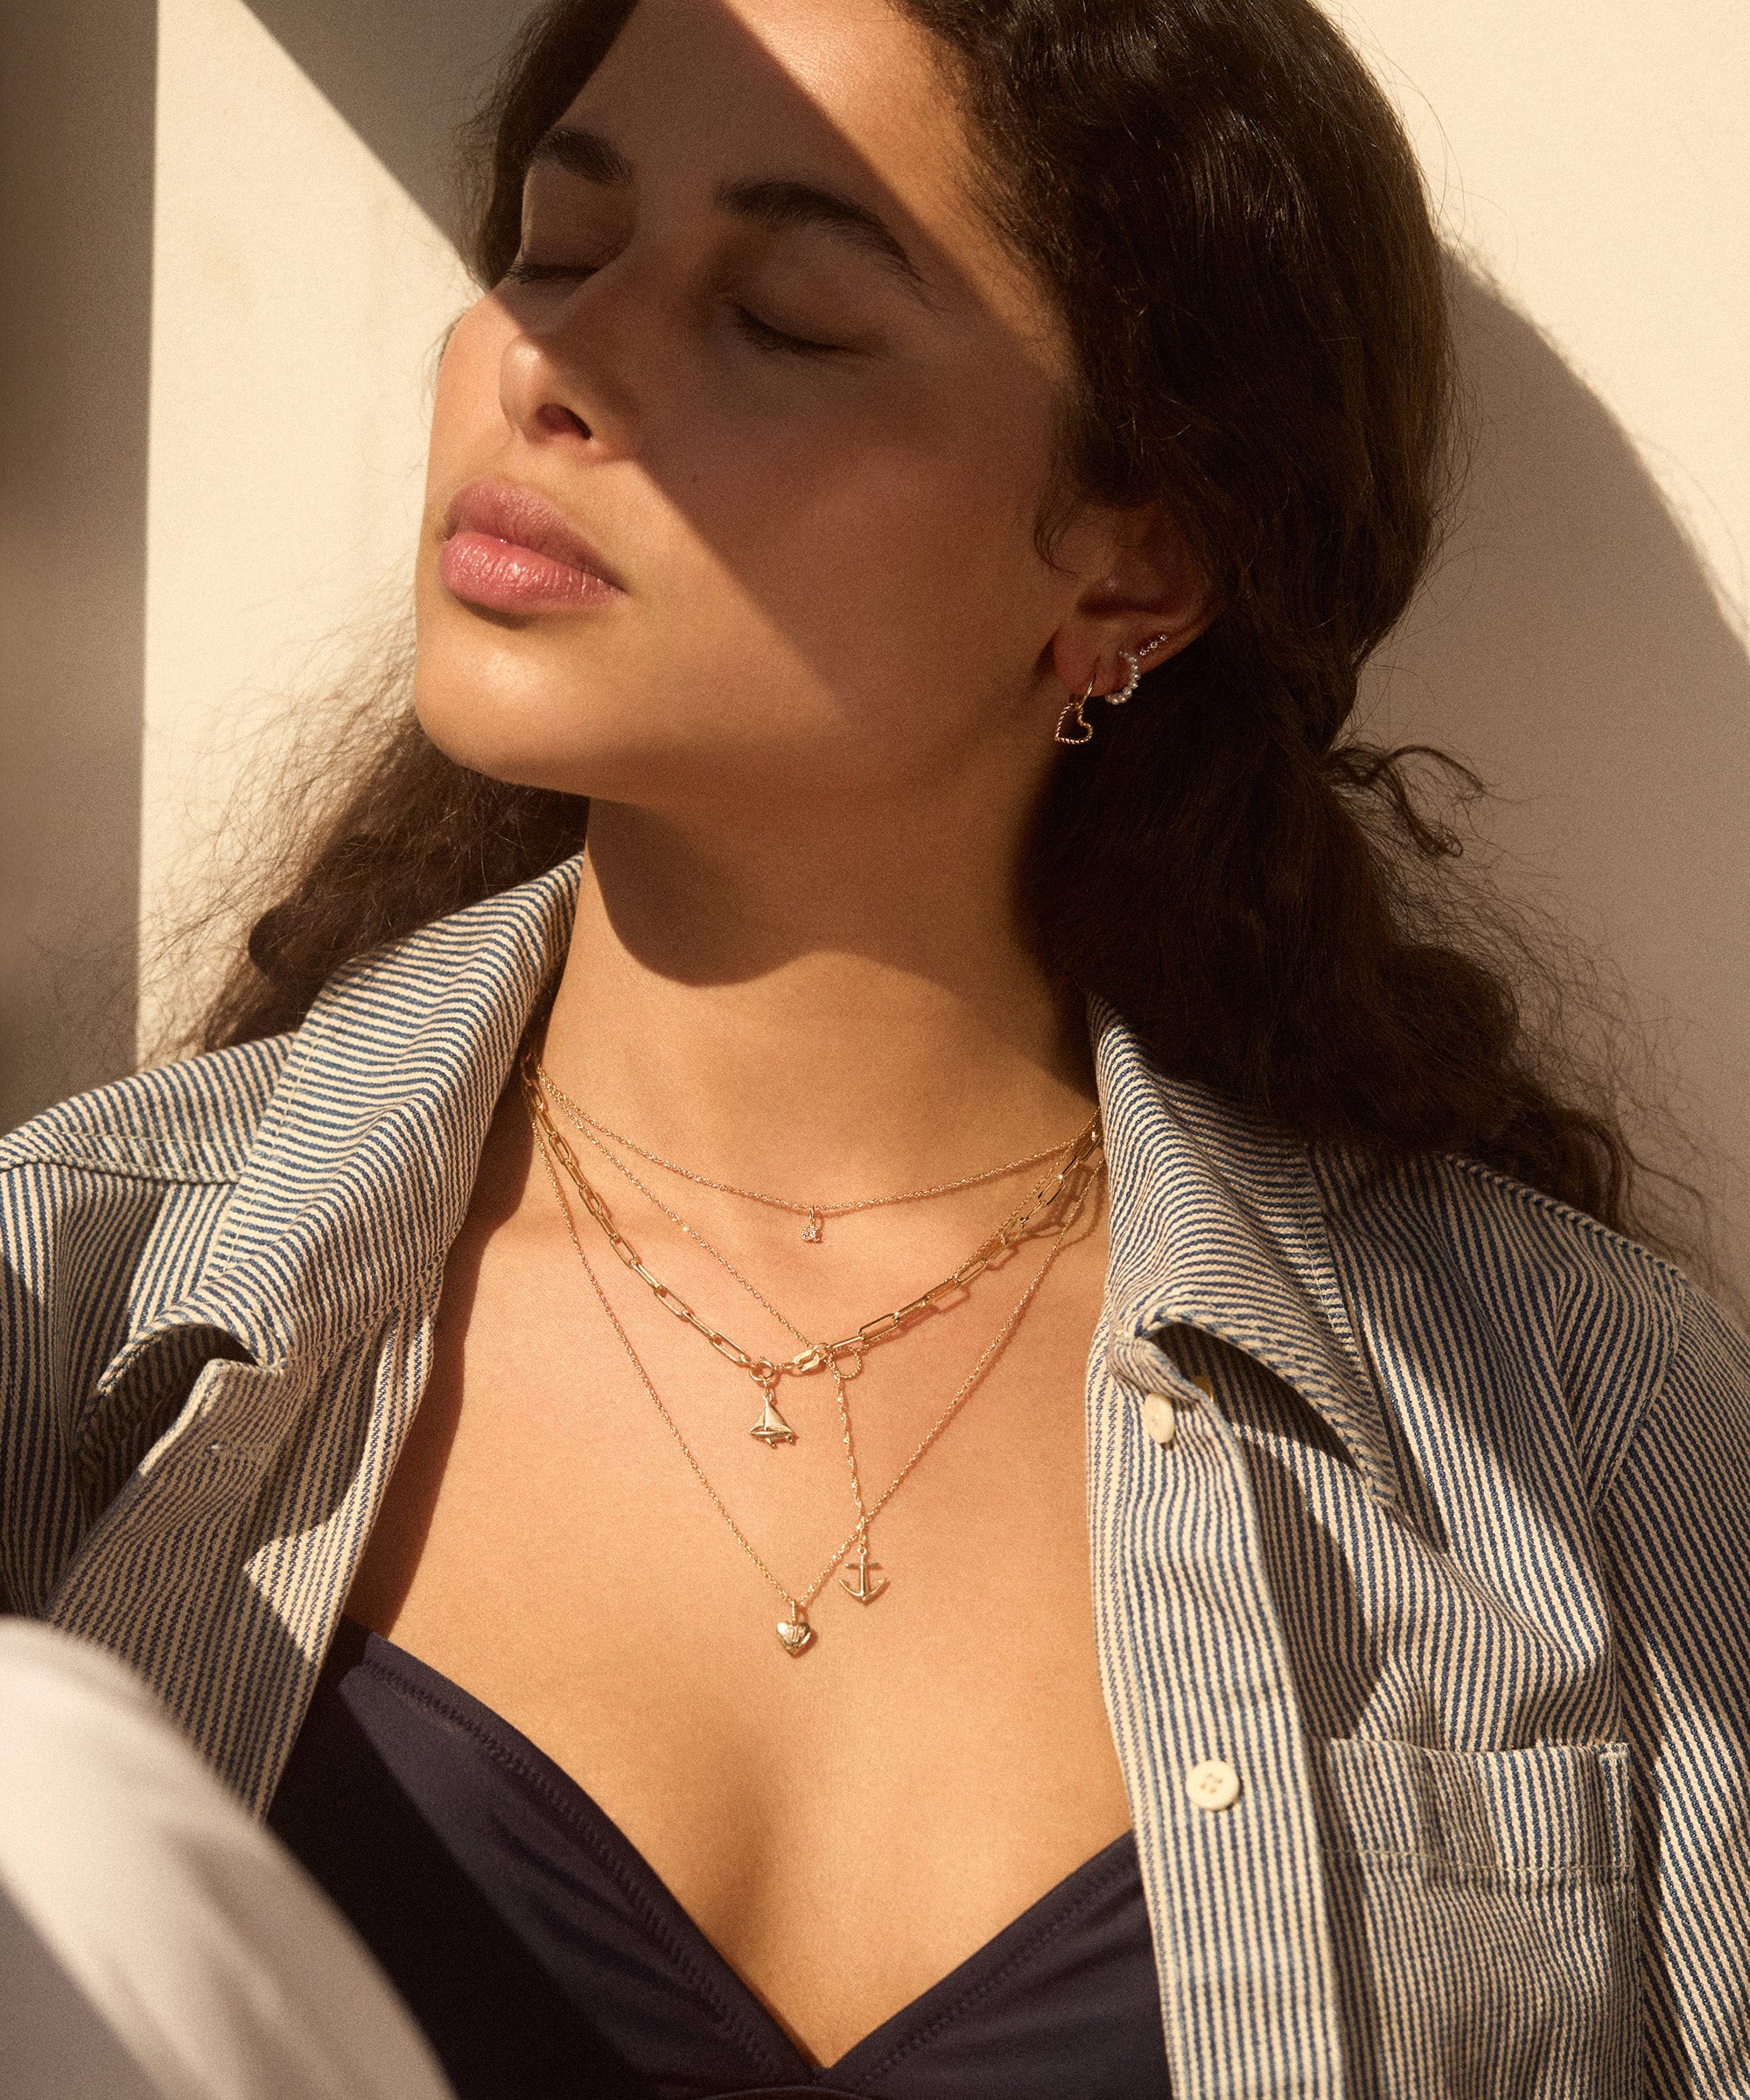 Catbird x J.Crew Is Here To Sail You Away To Warmer Weather